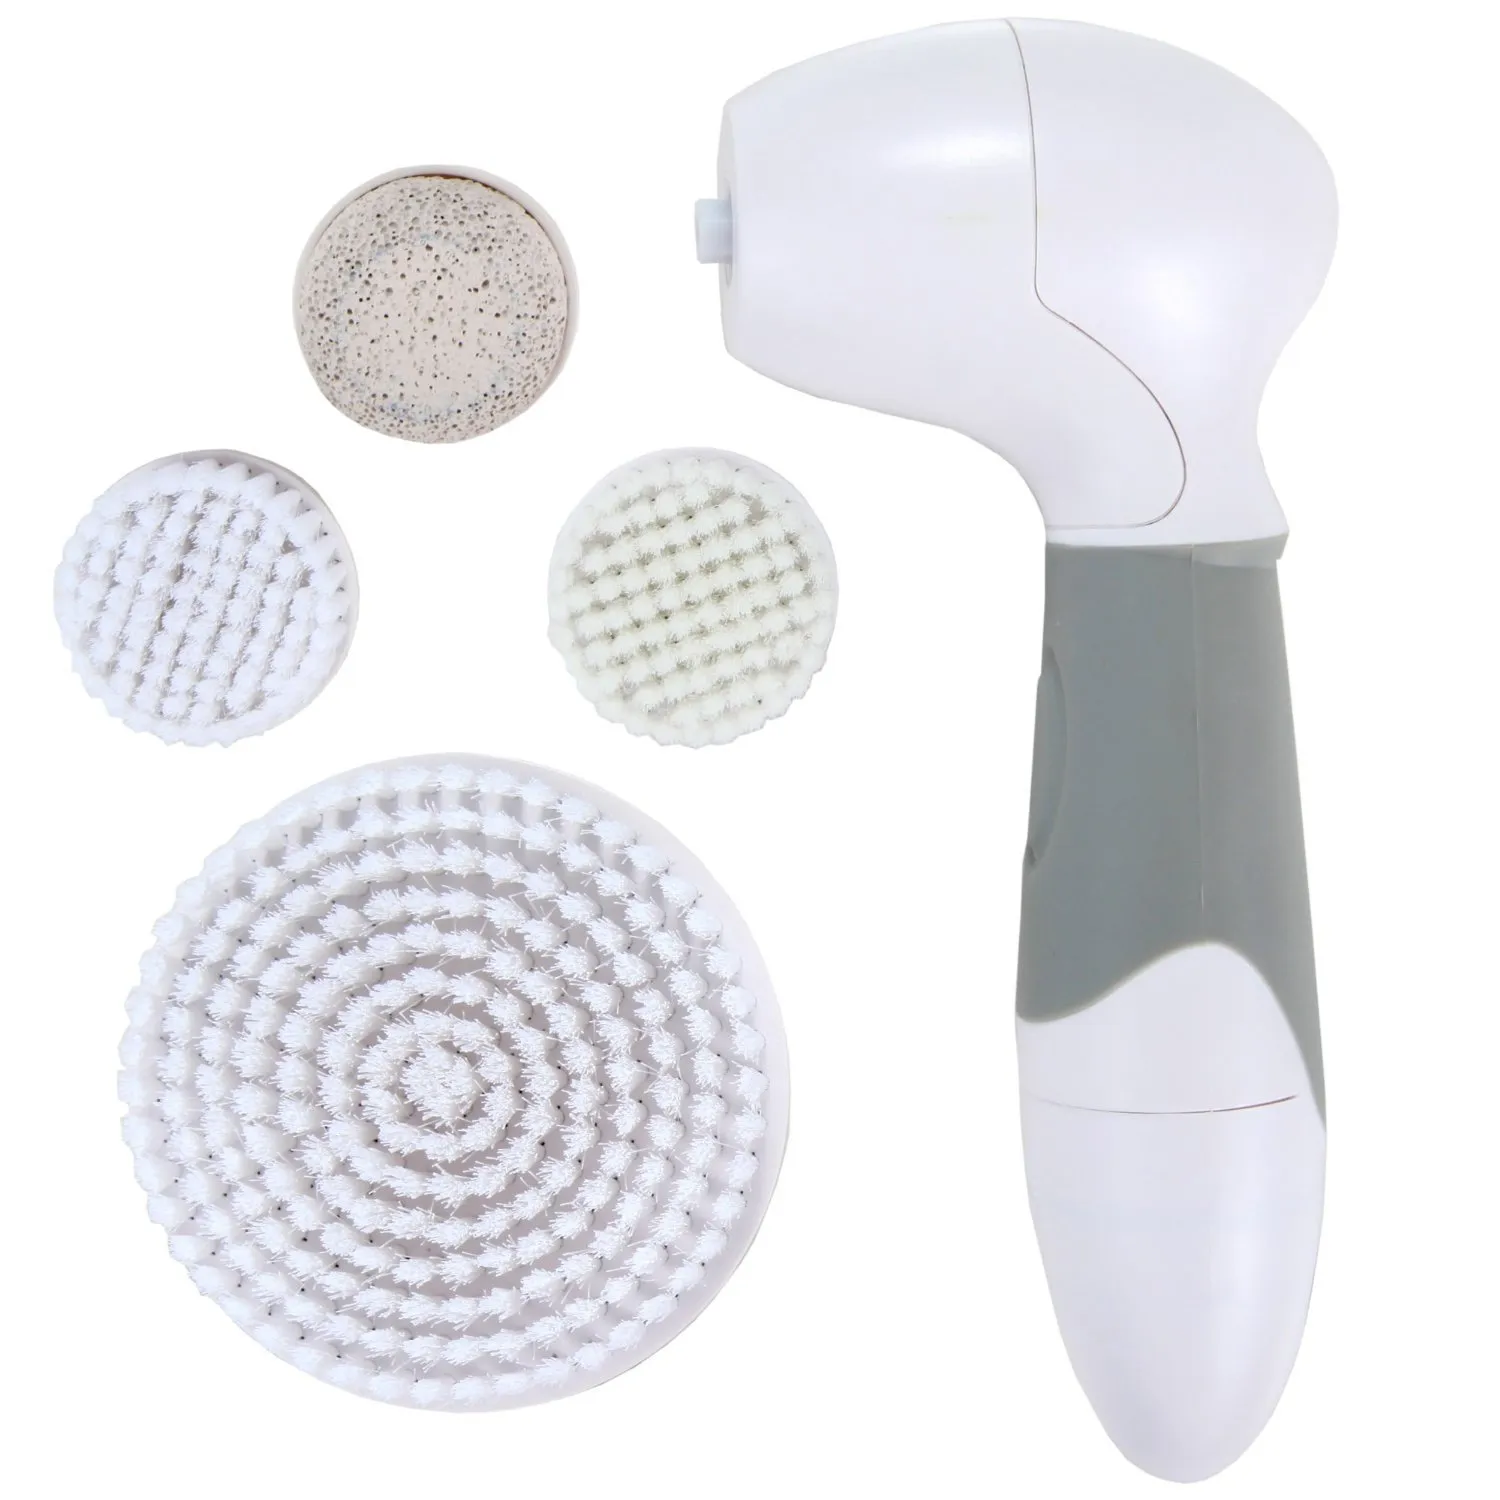 Electric Facial Brush Cleanser Massager Scrubber Face Cleaning Brushes Spa Face Skin Care Device Kits with box package by DHL